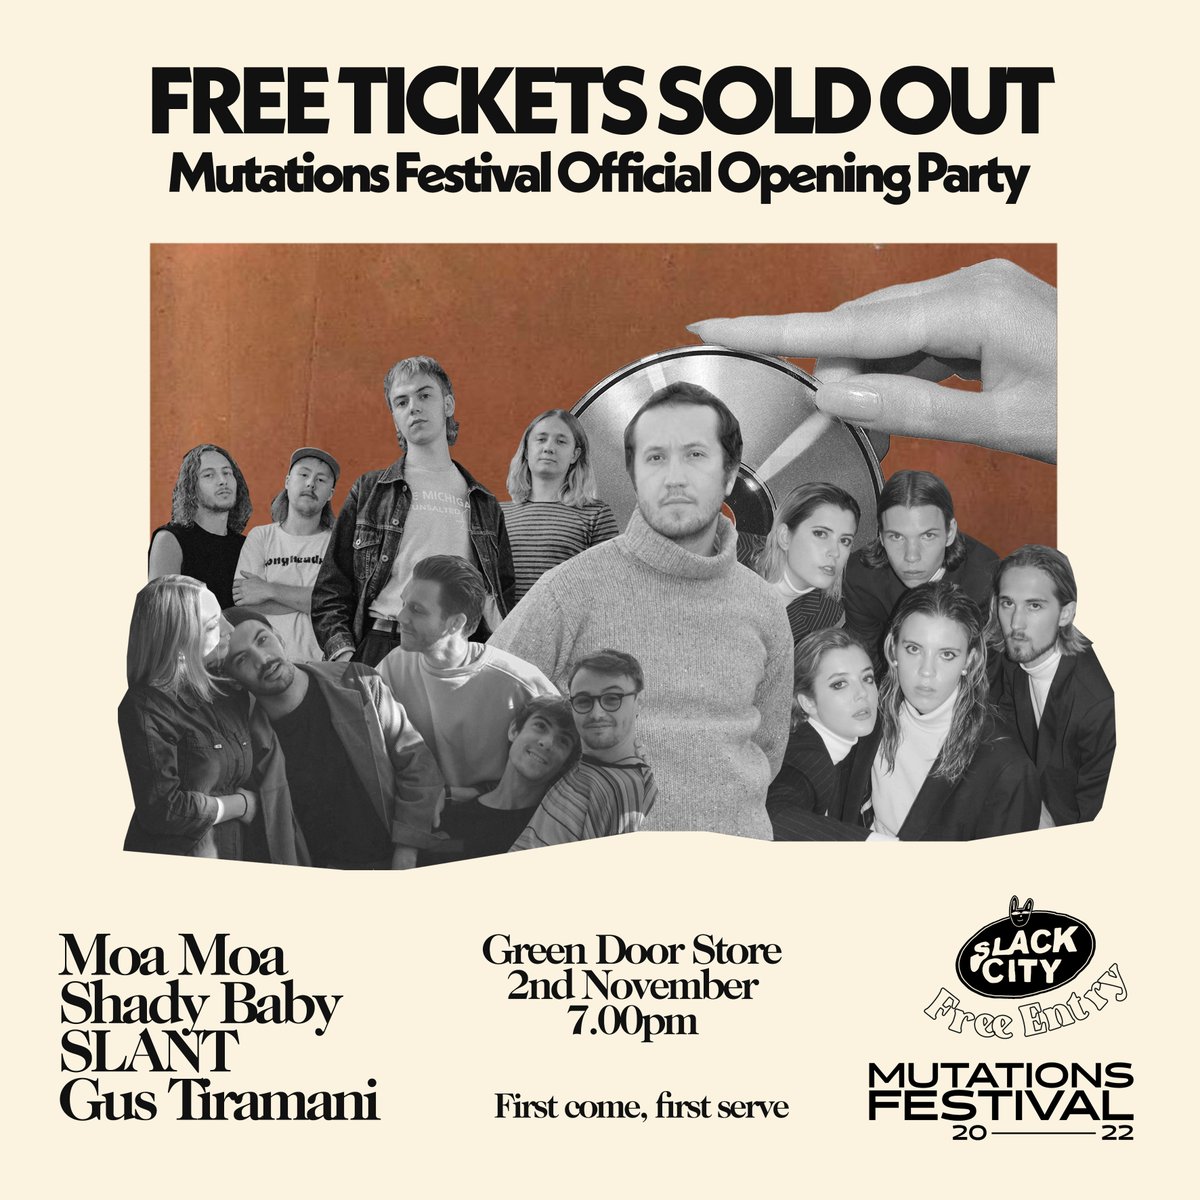 Well well well… All the free tickets for our official opening party of @mutationsfest went within a couple of days. MAD. However, if you missed out, fret not. Tickets do not guarantee entry, so if you get down early enough, chances are you’ll still be able to get in.